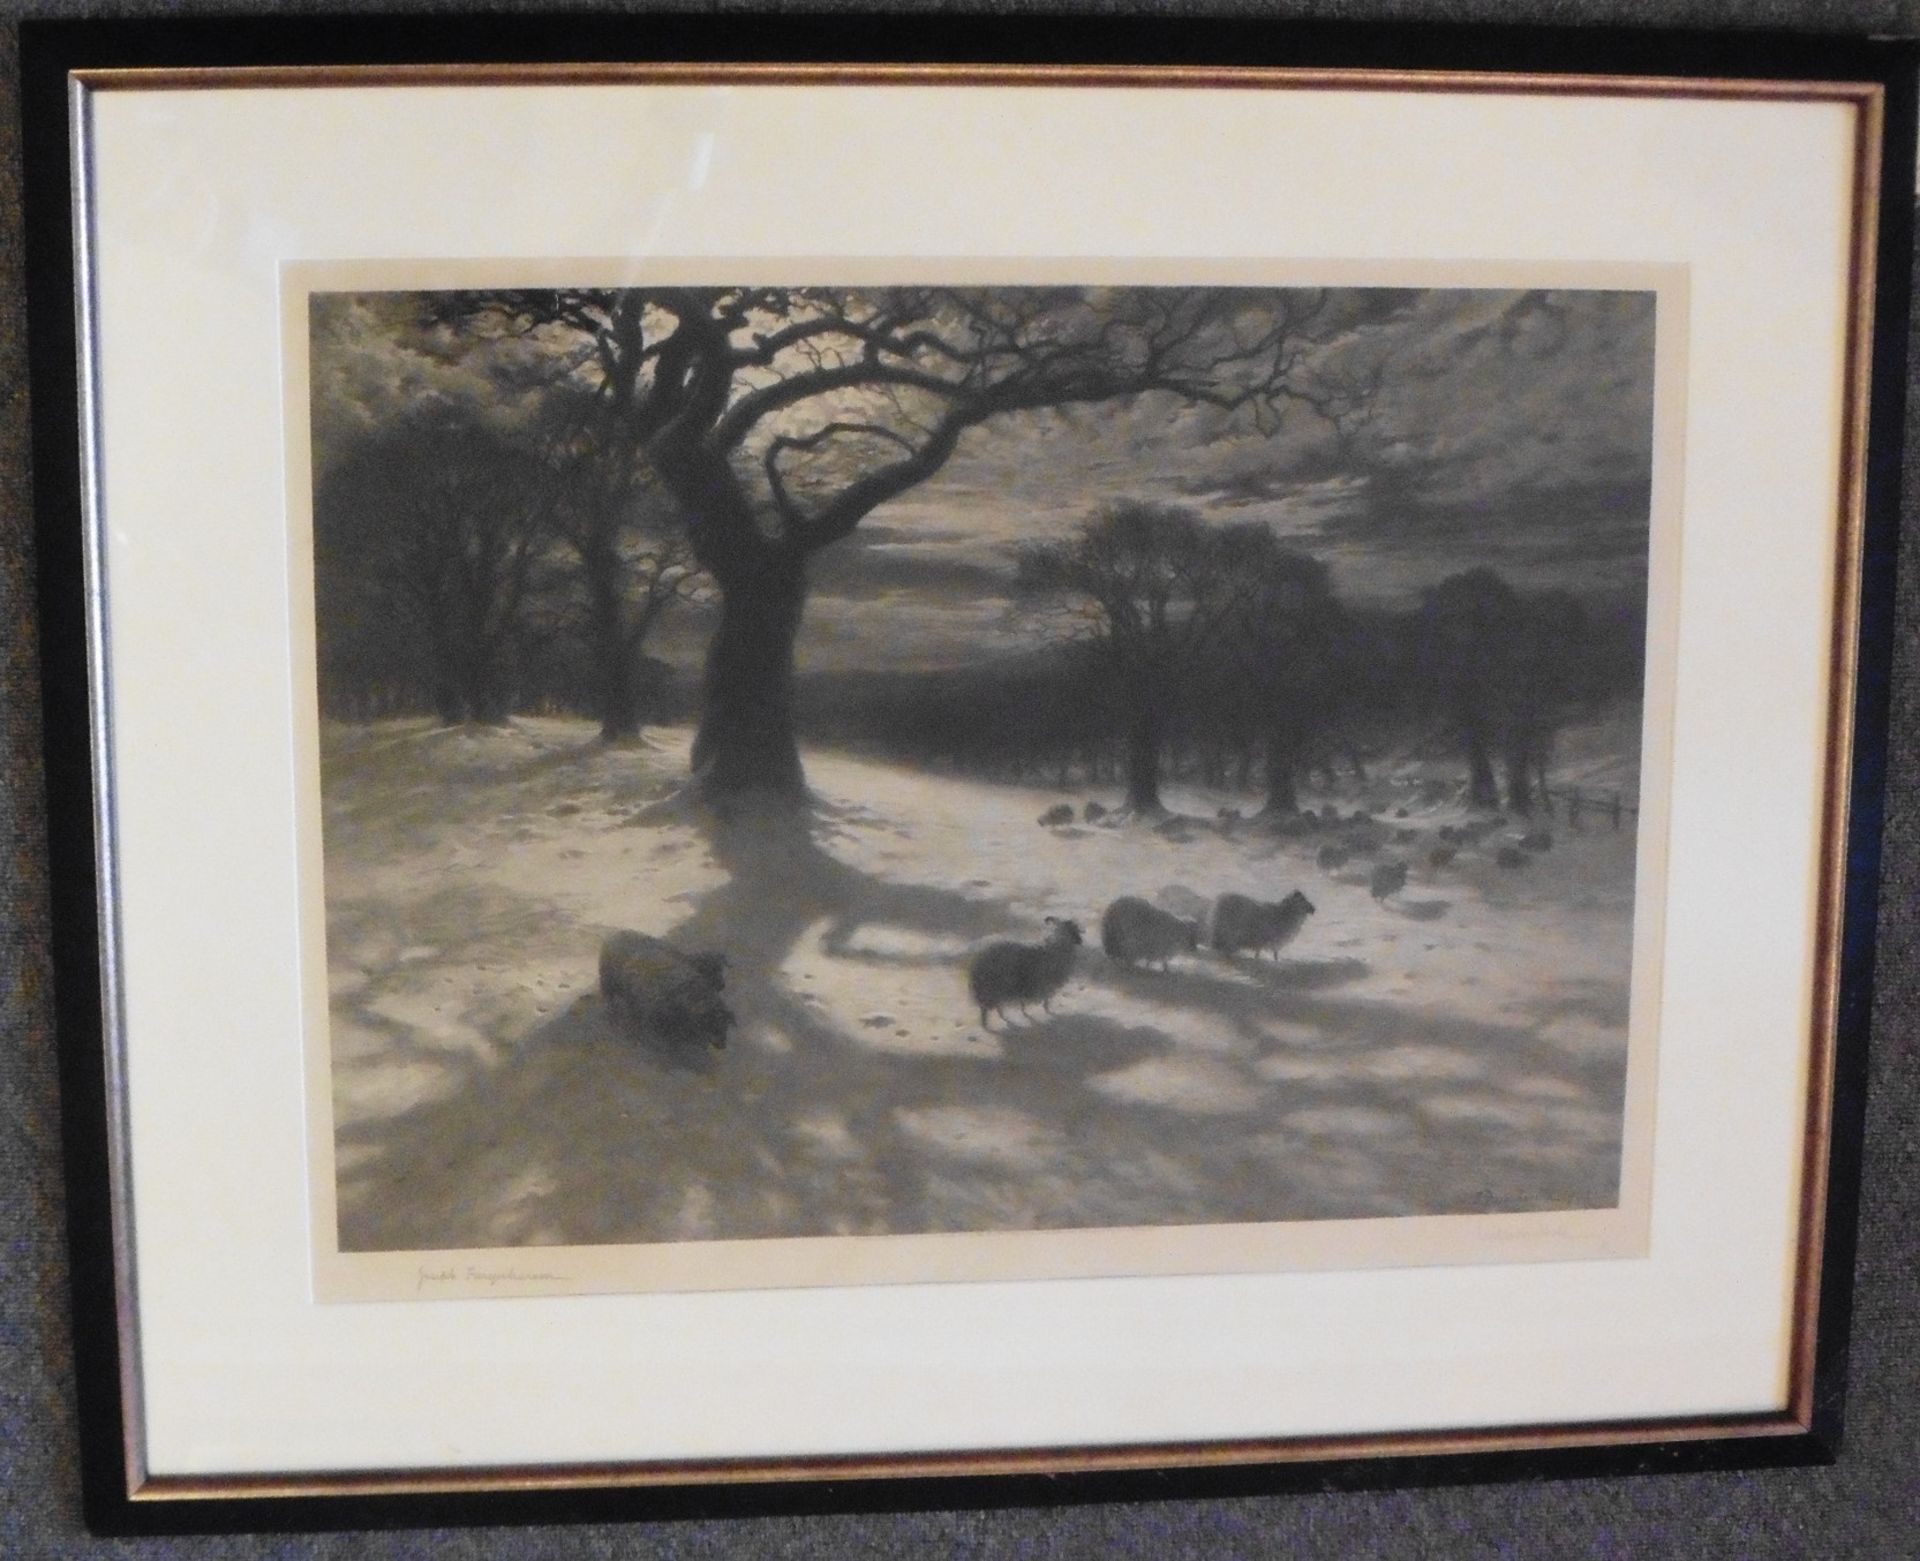 Joseph Farquharson 1846-1935 signed etching O’er Snow-clad Pastures - Image 2 of 5